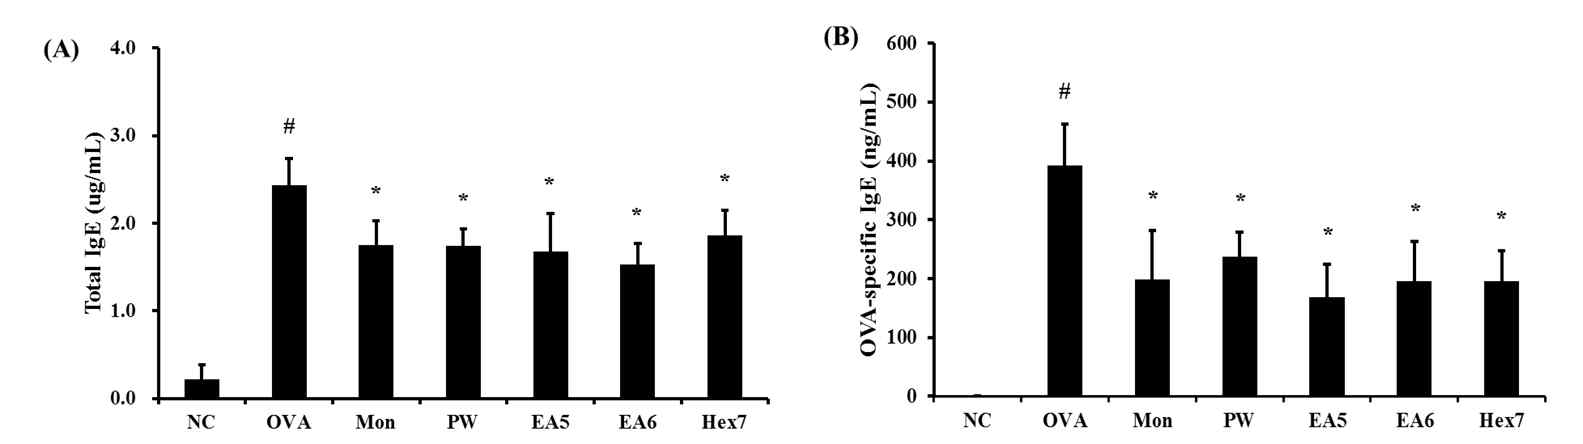 PW reduces the levels of total IgE (A) and ovalbumin-specific IgE (B) in the serum.